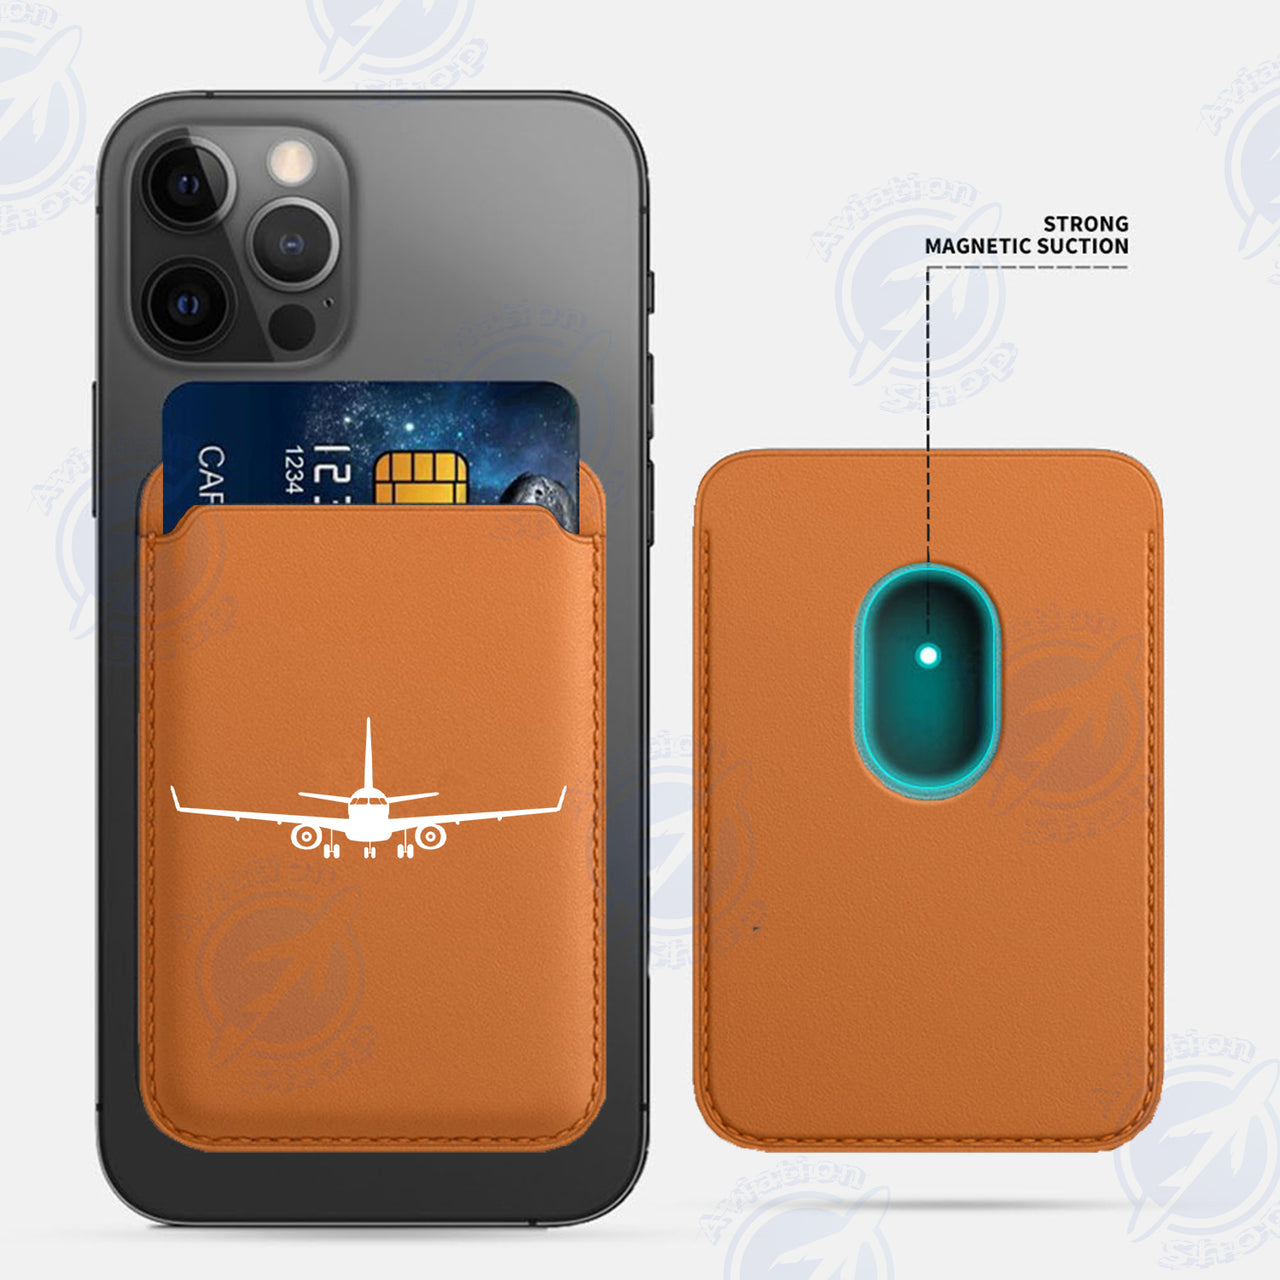 Embraer E-190 Silhouette Plane iPhone Cases Magnetic Card Wallet